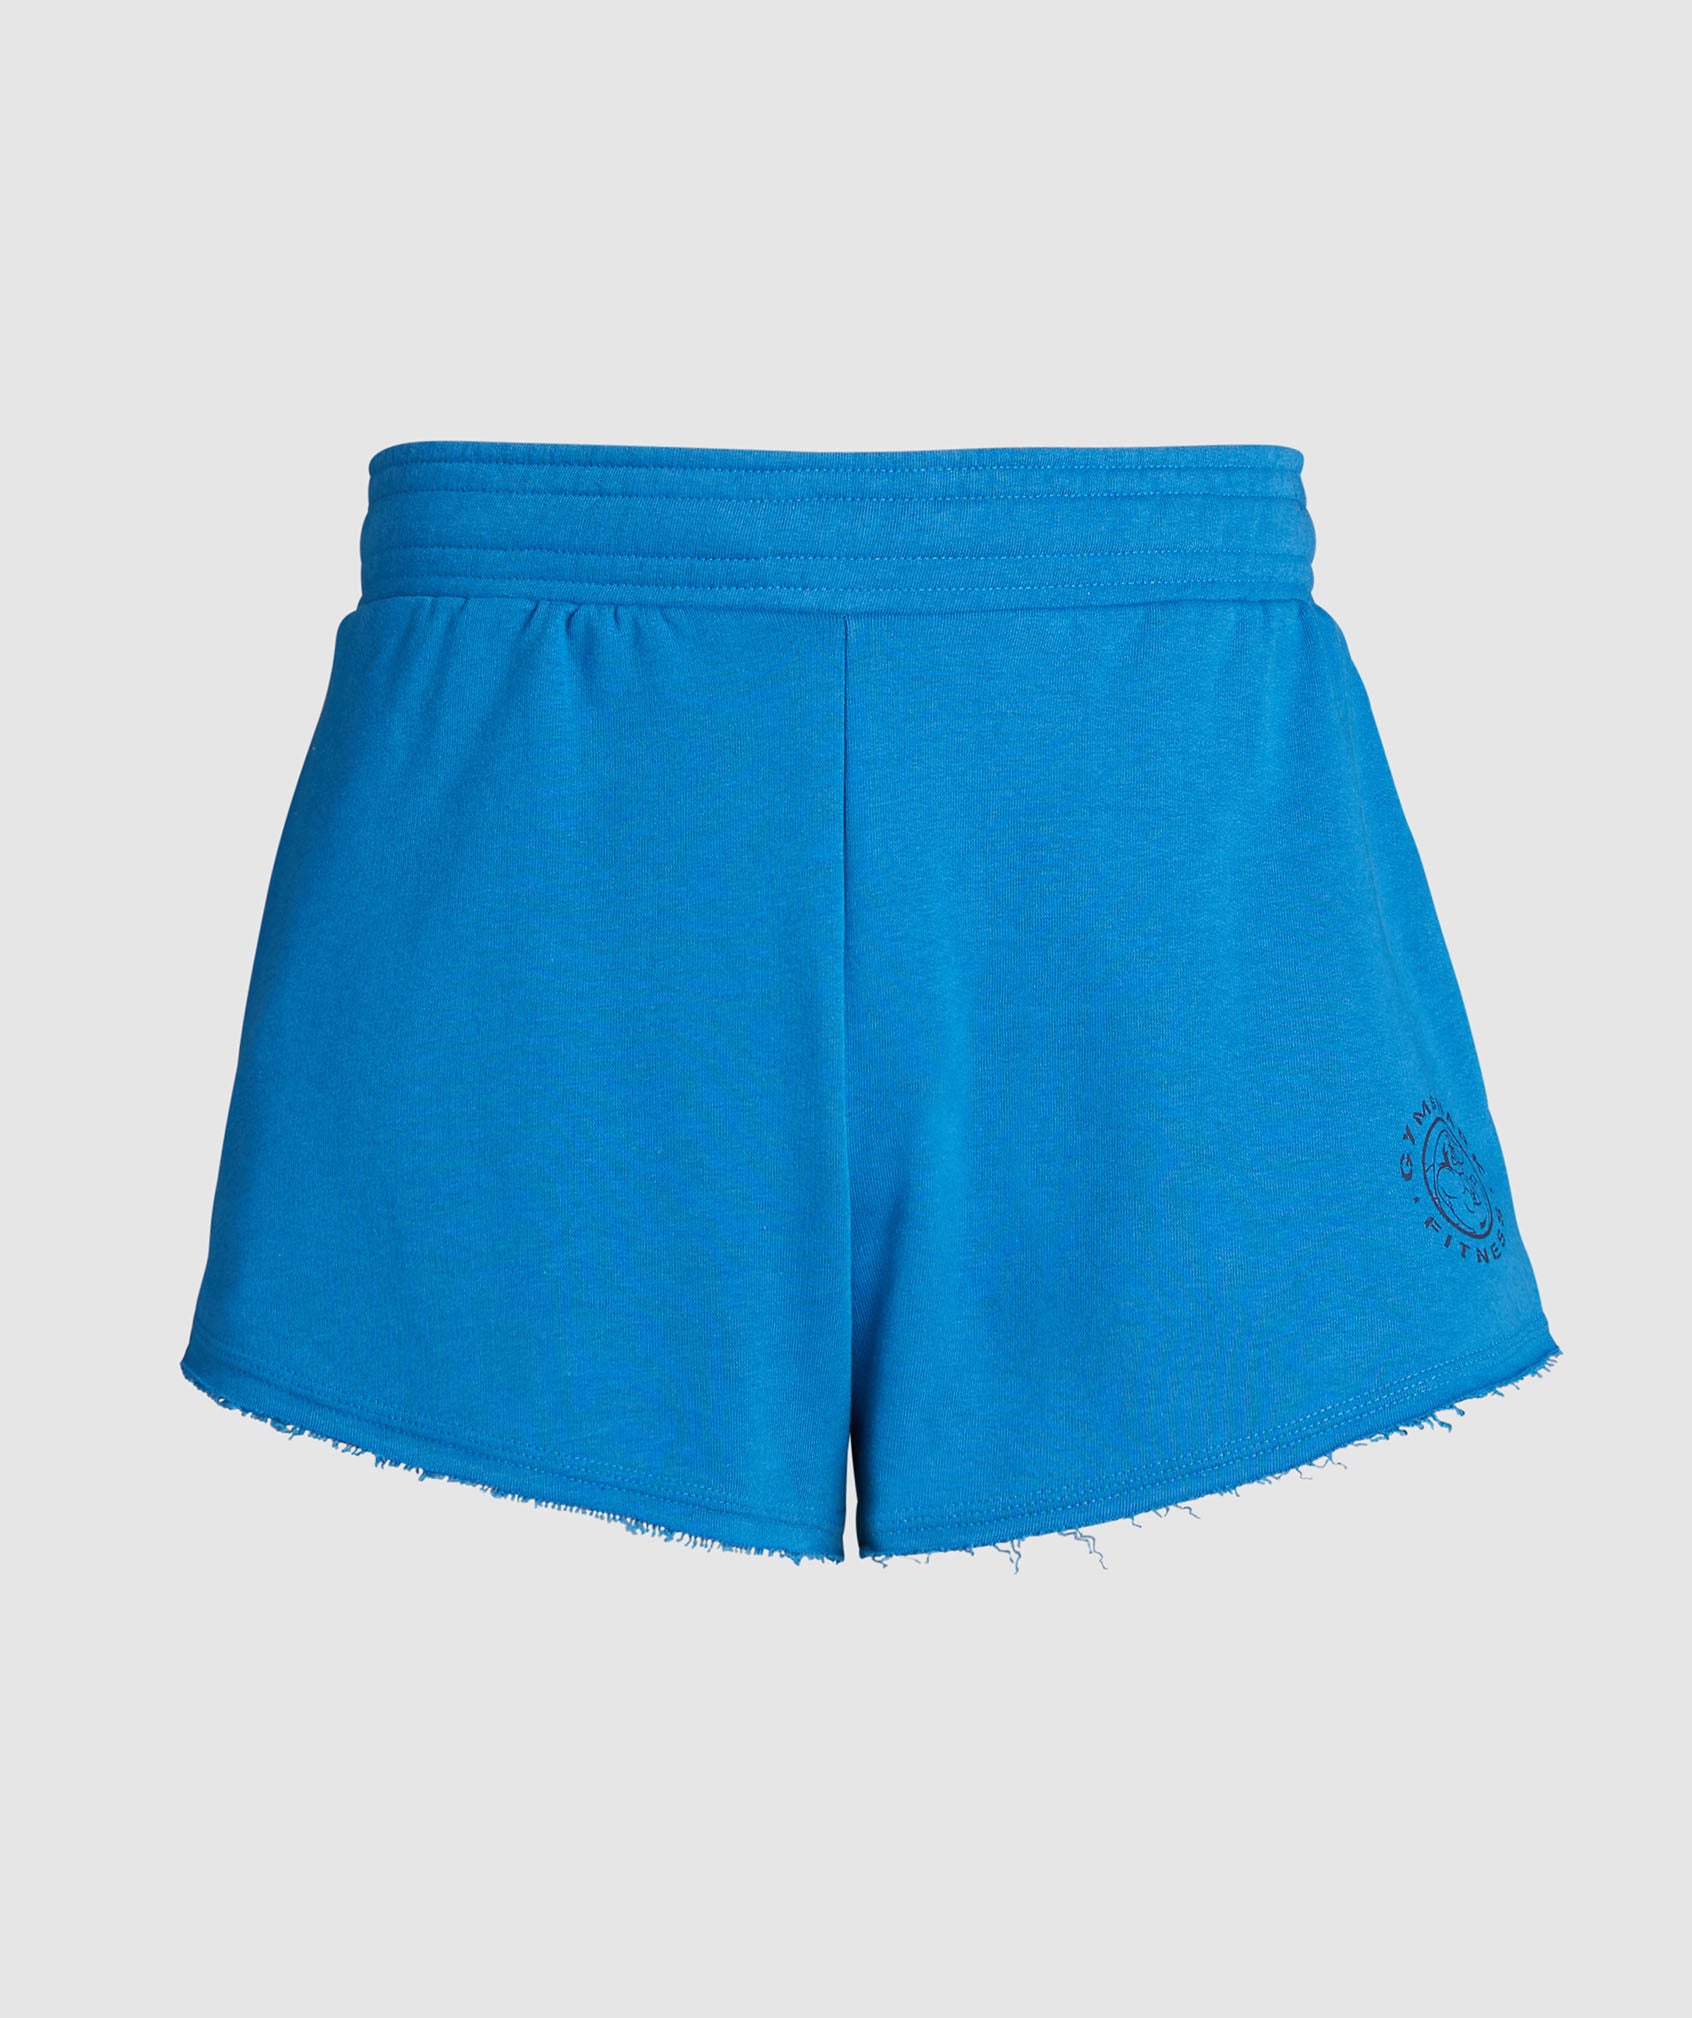 Legacy 4" Shorts in Retro Blue - view 6